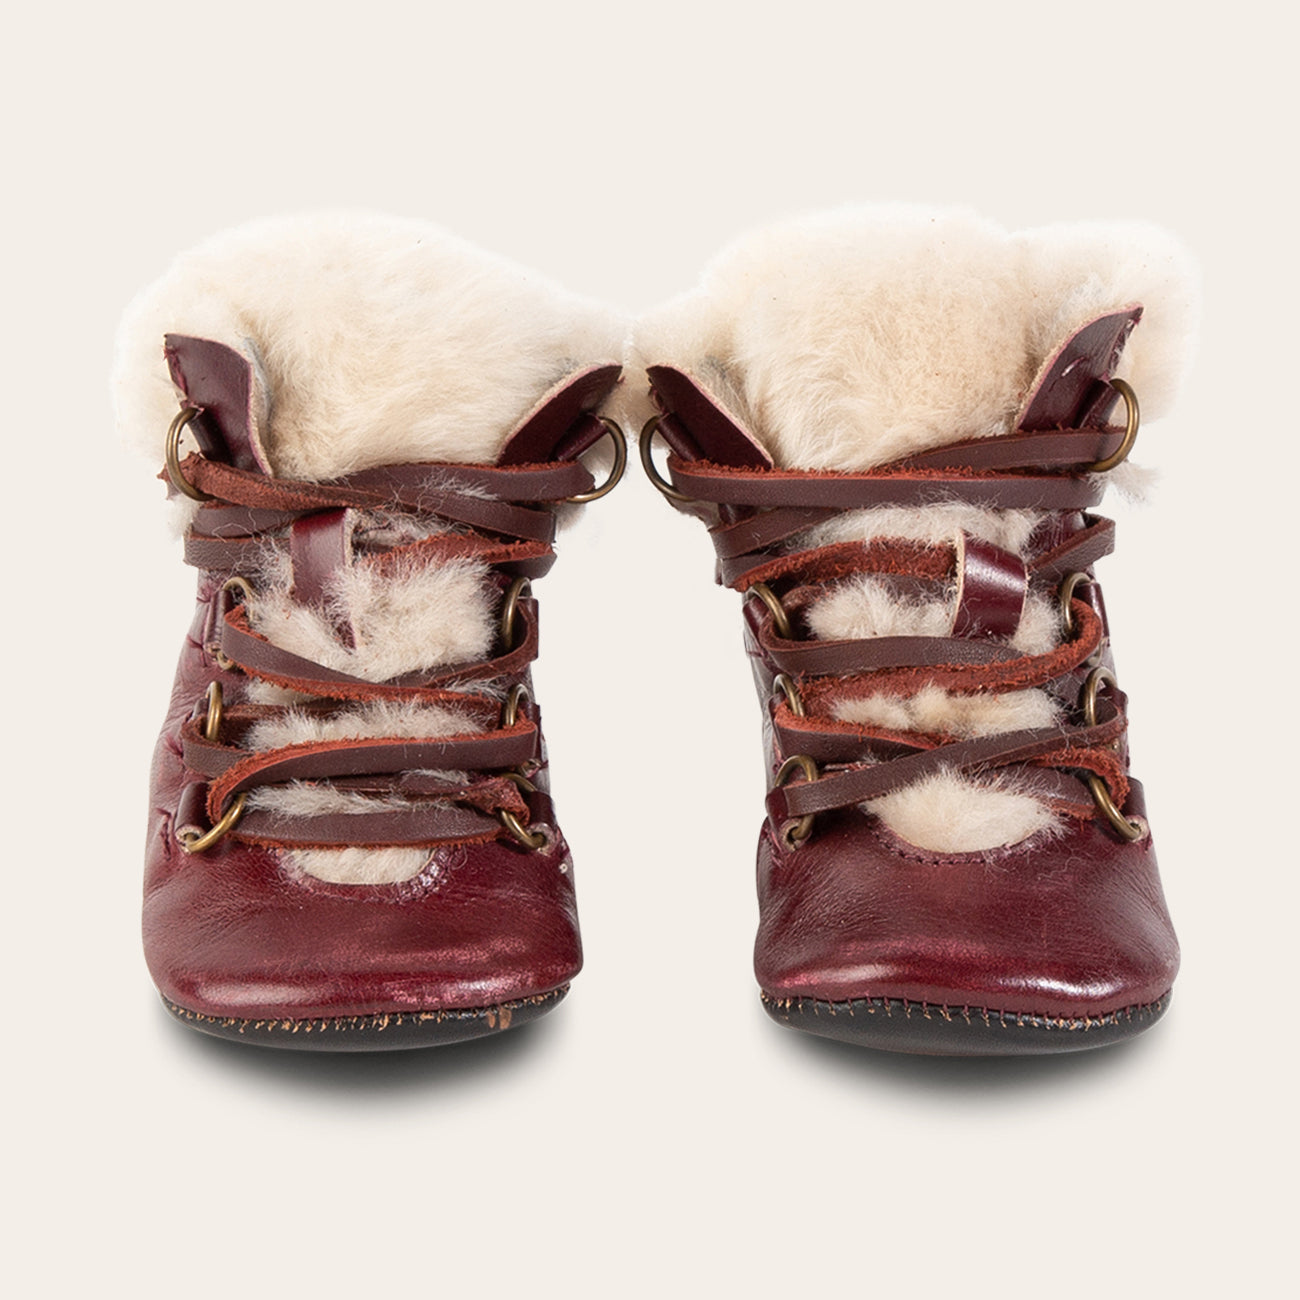 front view showing shearling lining and contrasting leather lace detailing on FREEBIRD infant baby Norway wine leather bootie